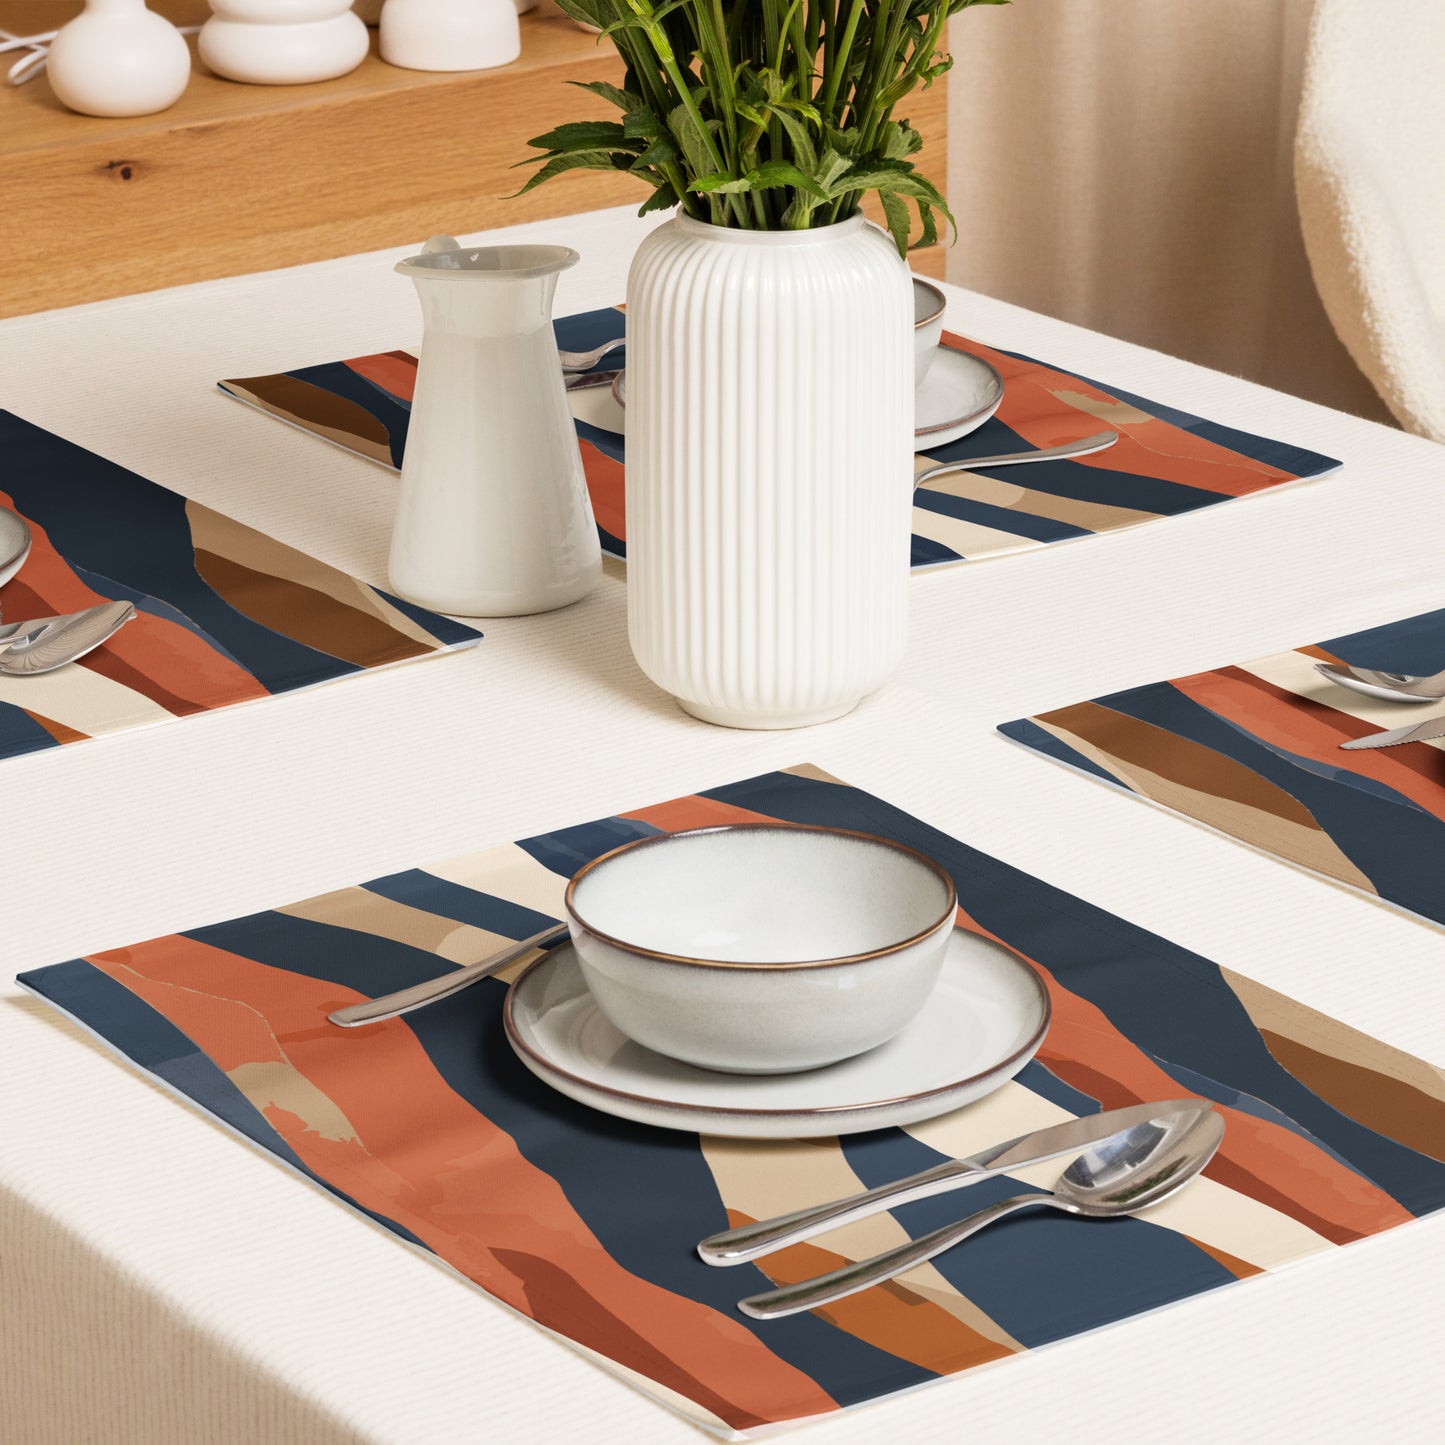 Abstract Mountain Landscape Table Placemat Set